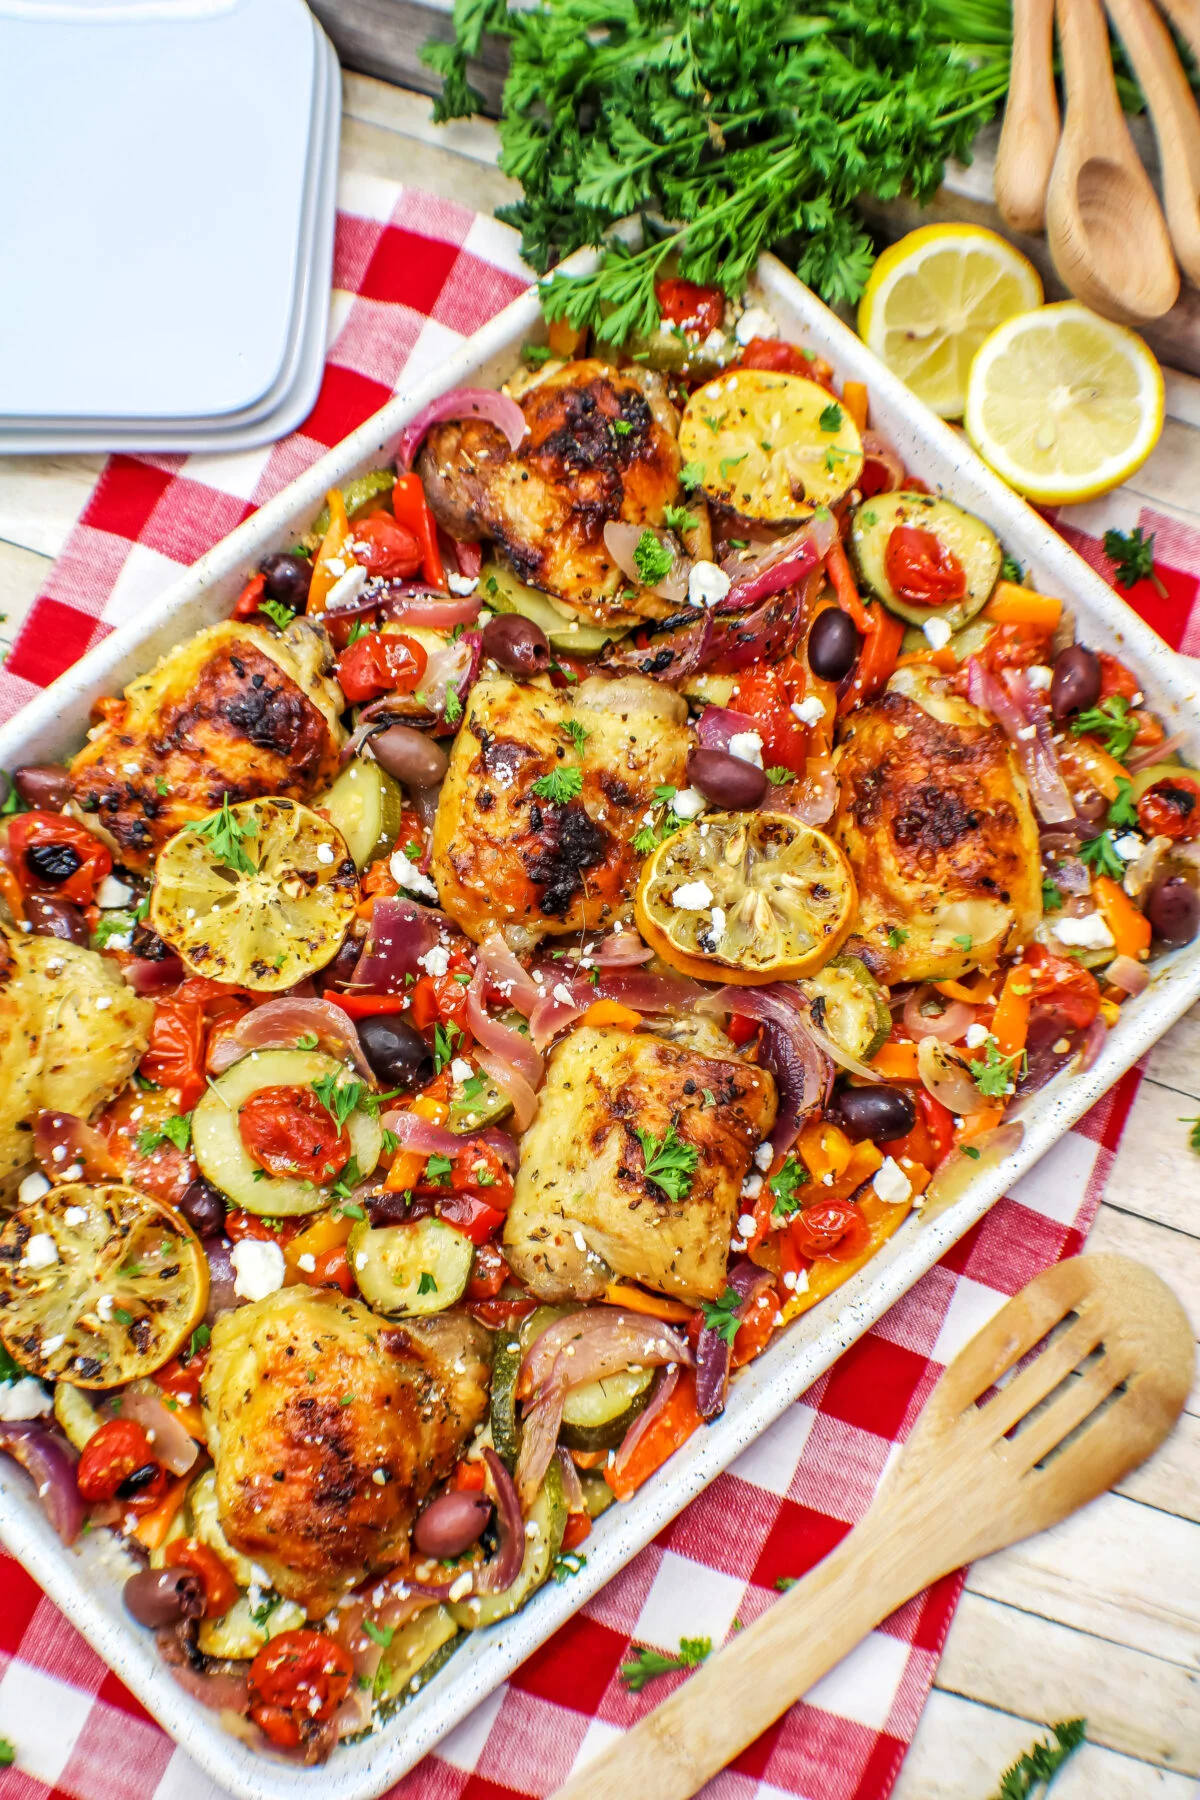 This Greek chicken sheet pan dinner is perfect for busy weeknights! Featuring Greek-inspired flavours, it's an easy family-friendly meal.